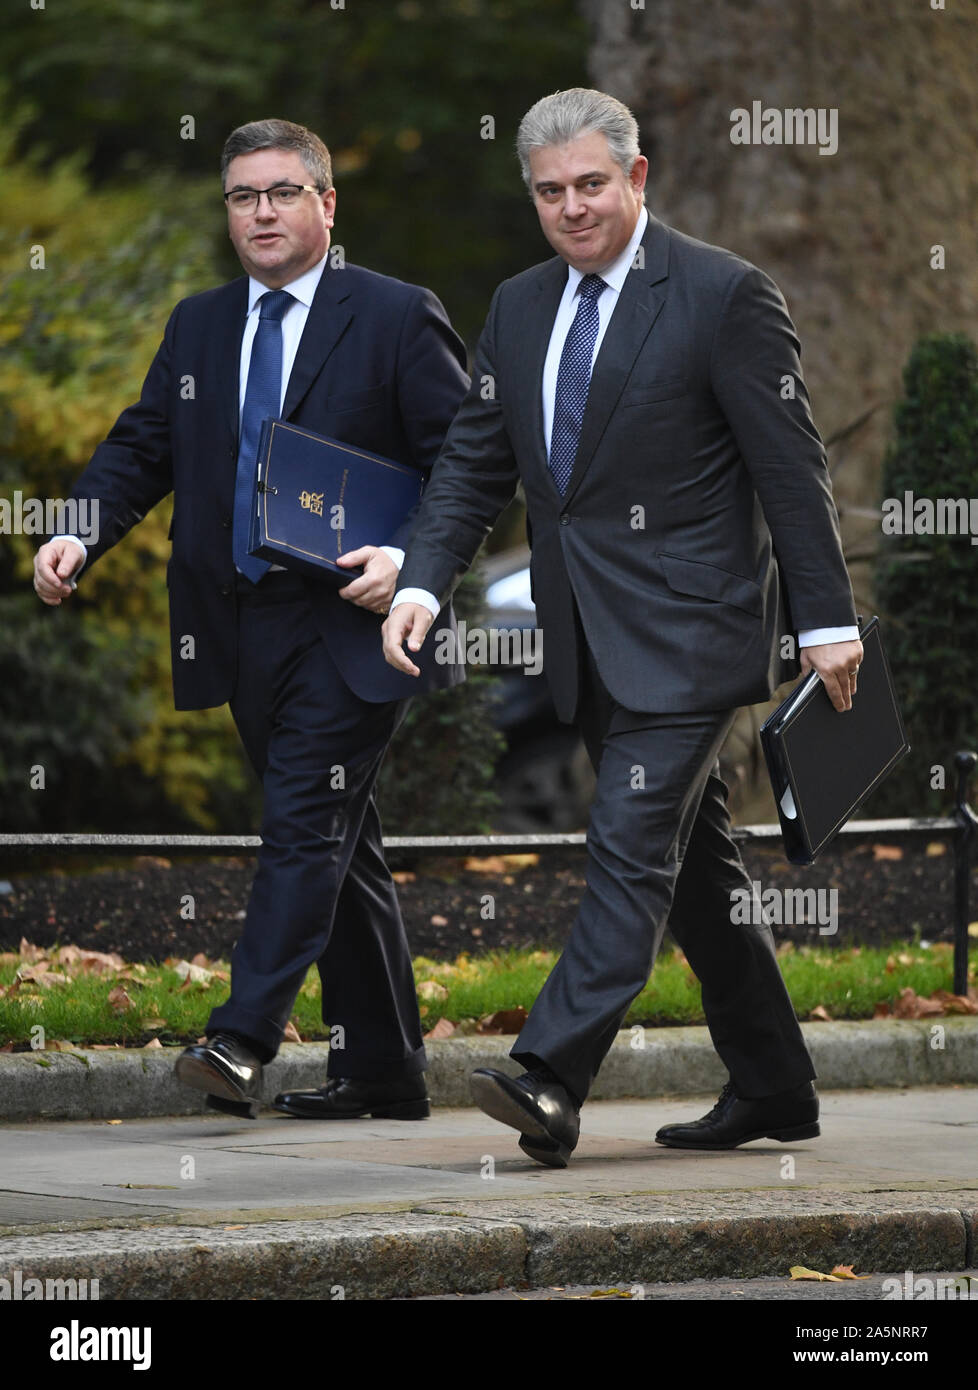 Justice Secretary Robert Buckland and Minister of State (for Security) Brandon Lewis (left) arriving for a Cabinet meeting in Downing Street, London. Stock Photo